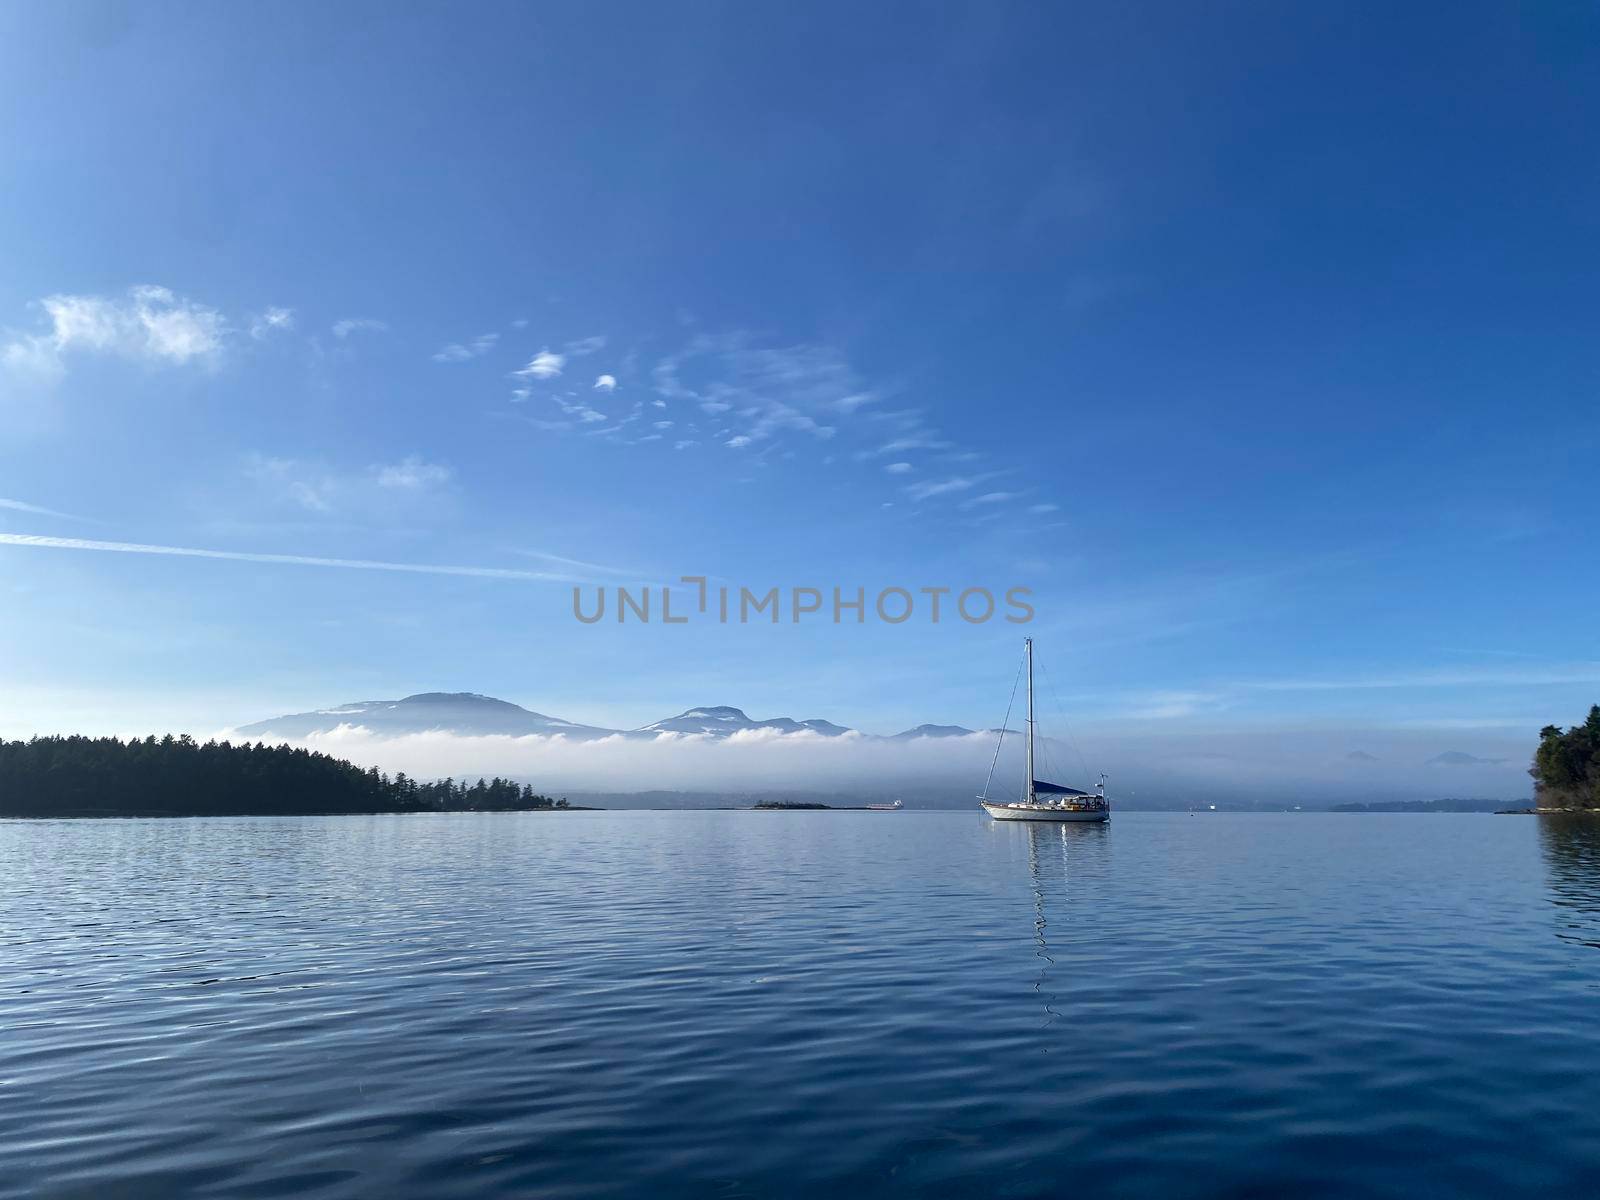 A single sailboat at anchor with calm water and blue skies by Granchinho